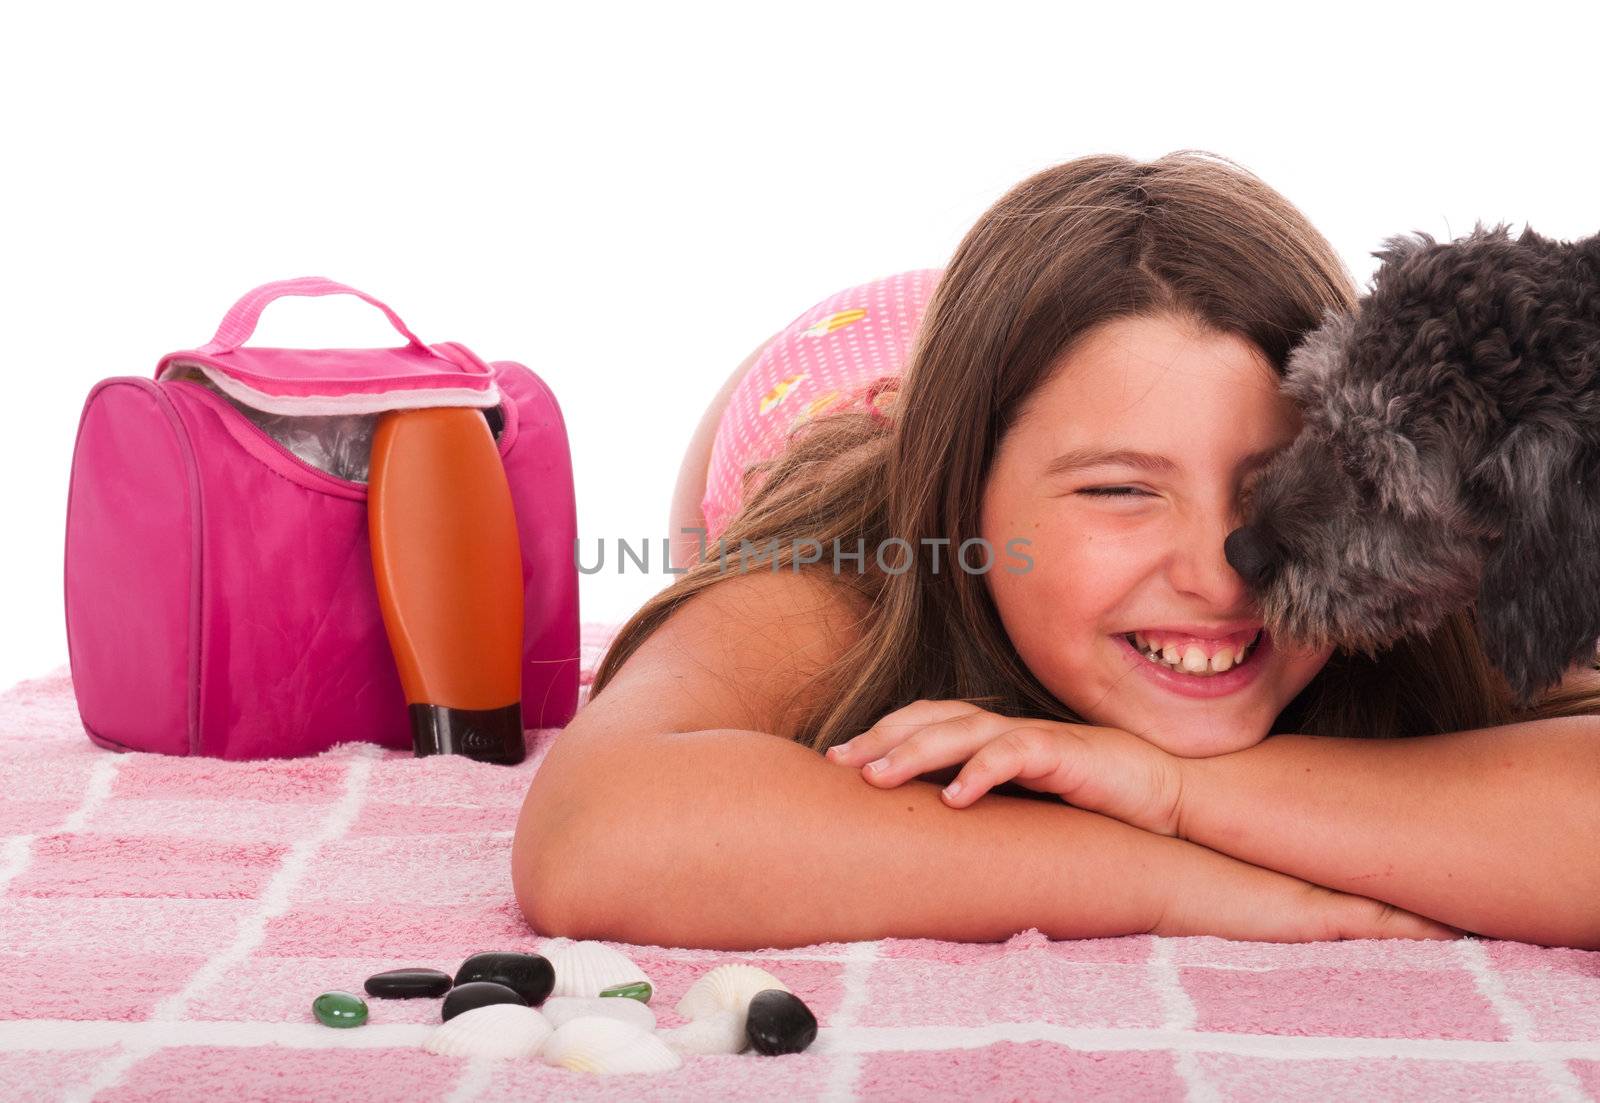 smiling brunette teenage girl in swimsuit at the beach getting a kiss from her shipoo dog (studio setting with beach and personal items) isolated on white background